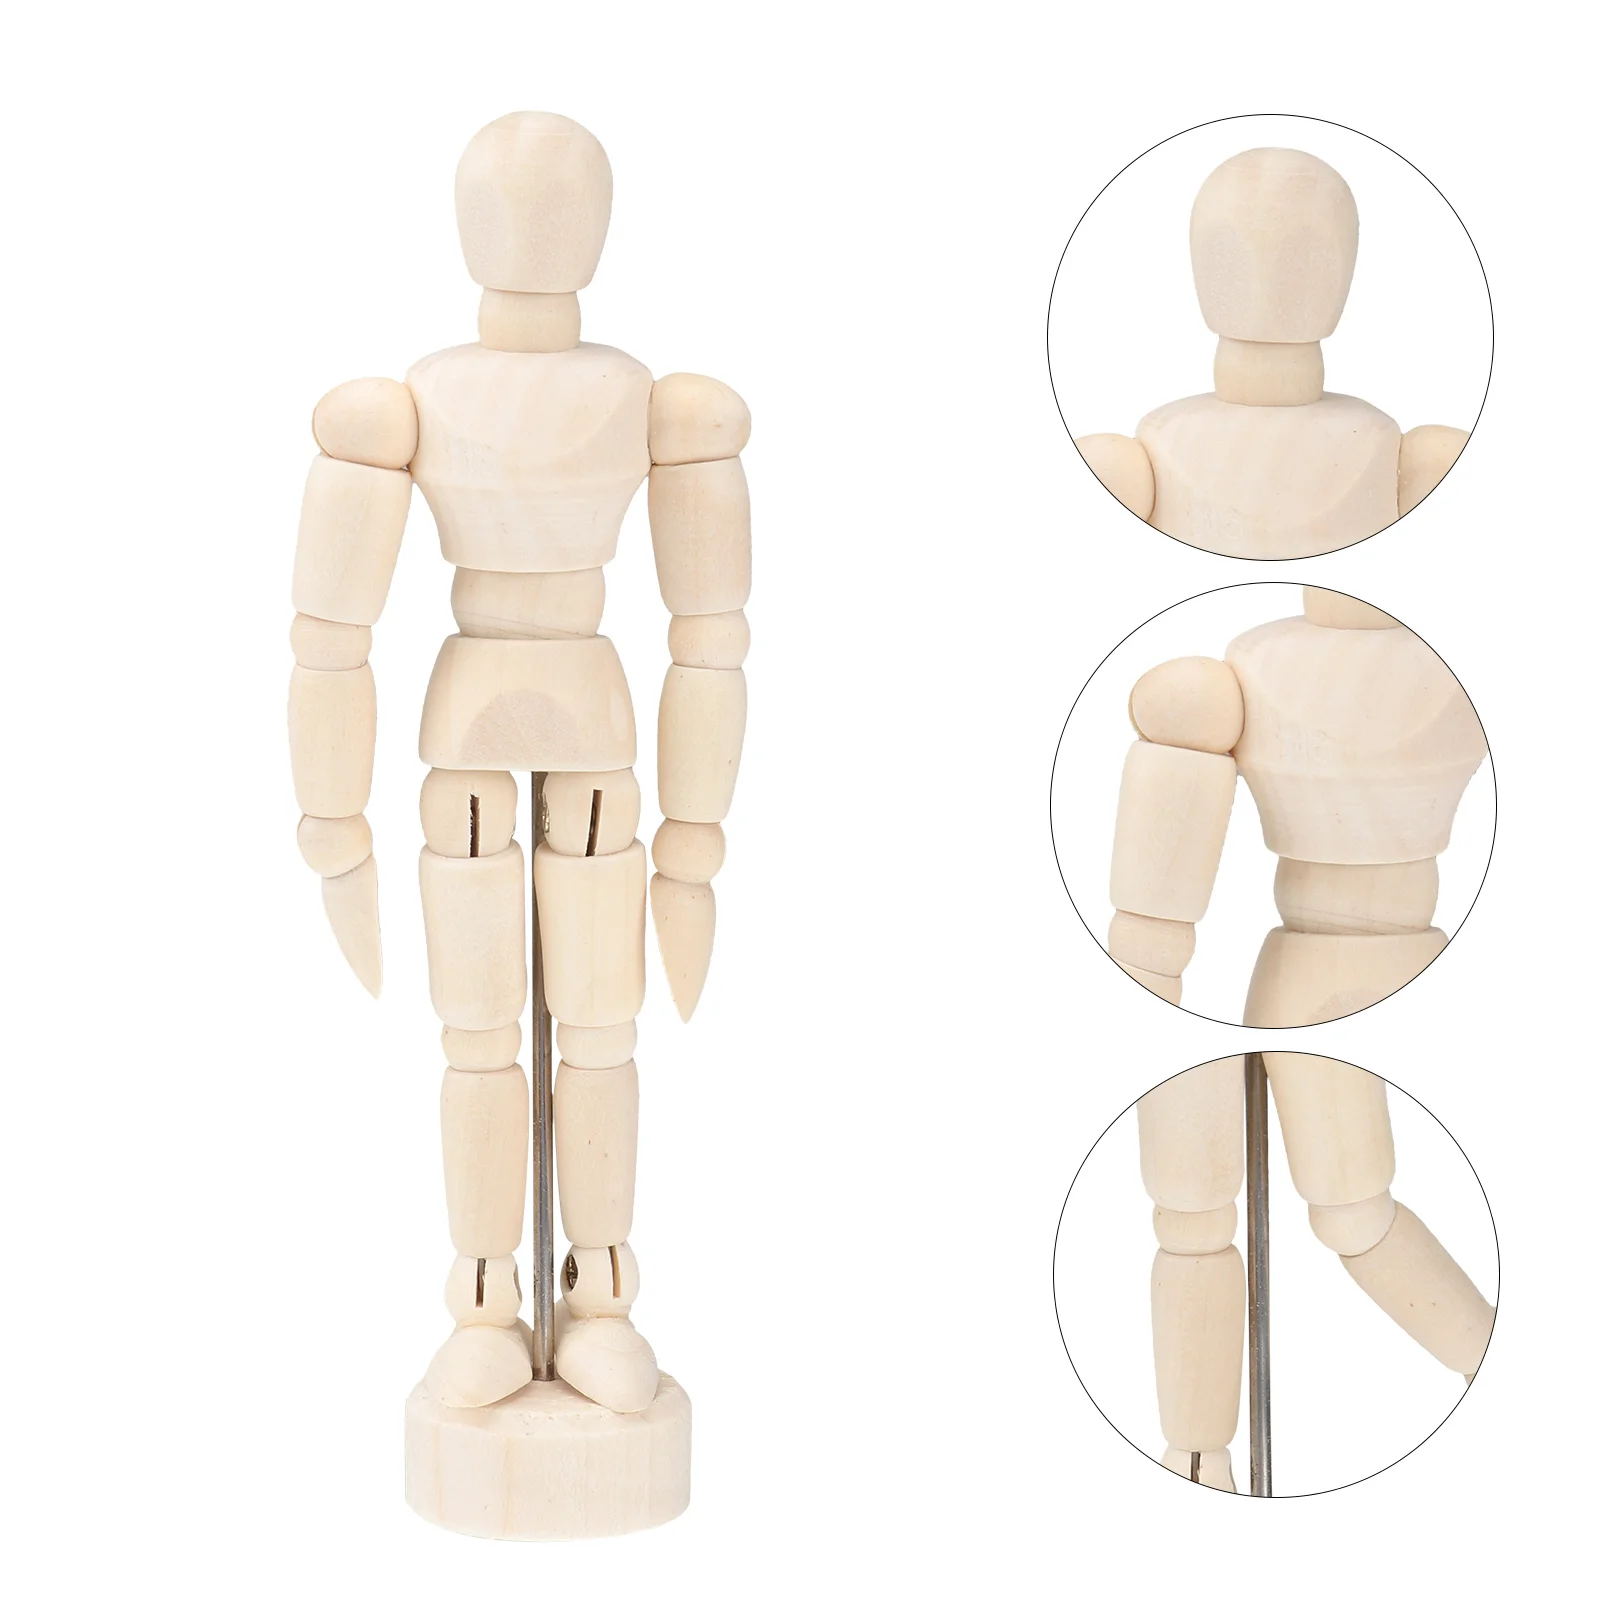 

3pcs Artist Wooden Manikin Movebale Action Figure Model for Sketching Articulated Mannequin Drawing Models for Artists 45Inches